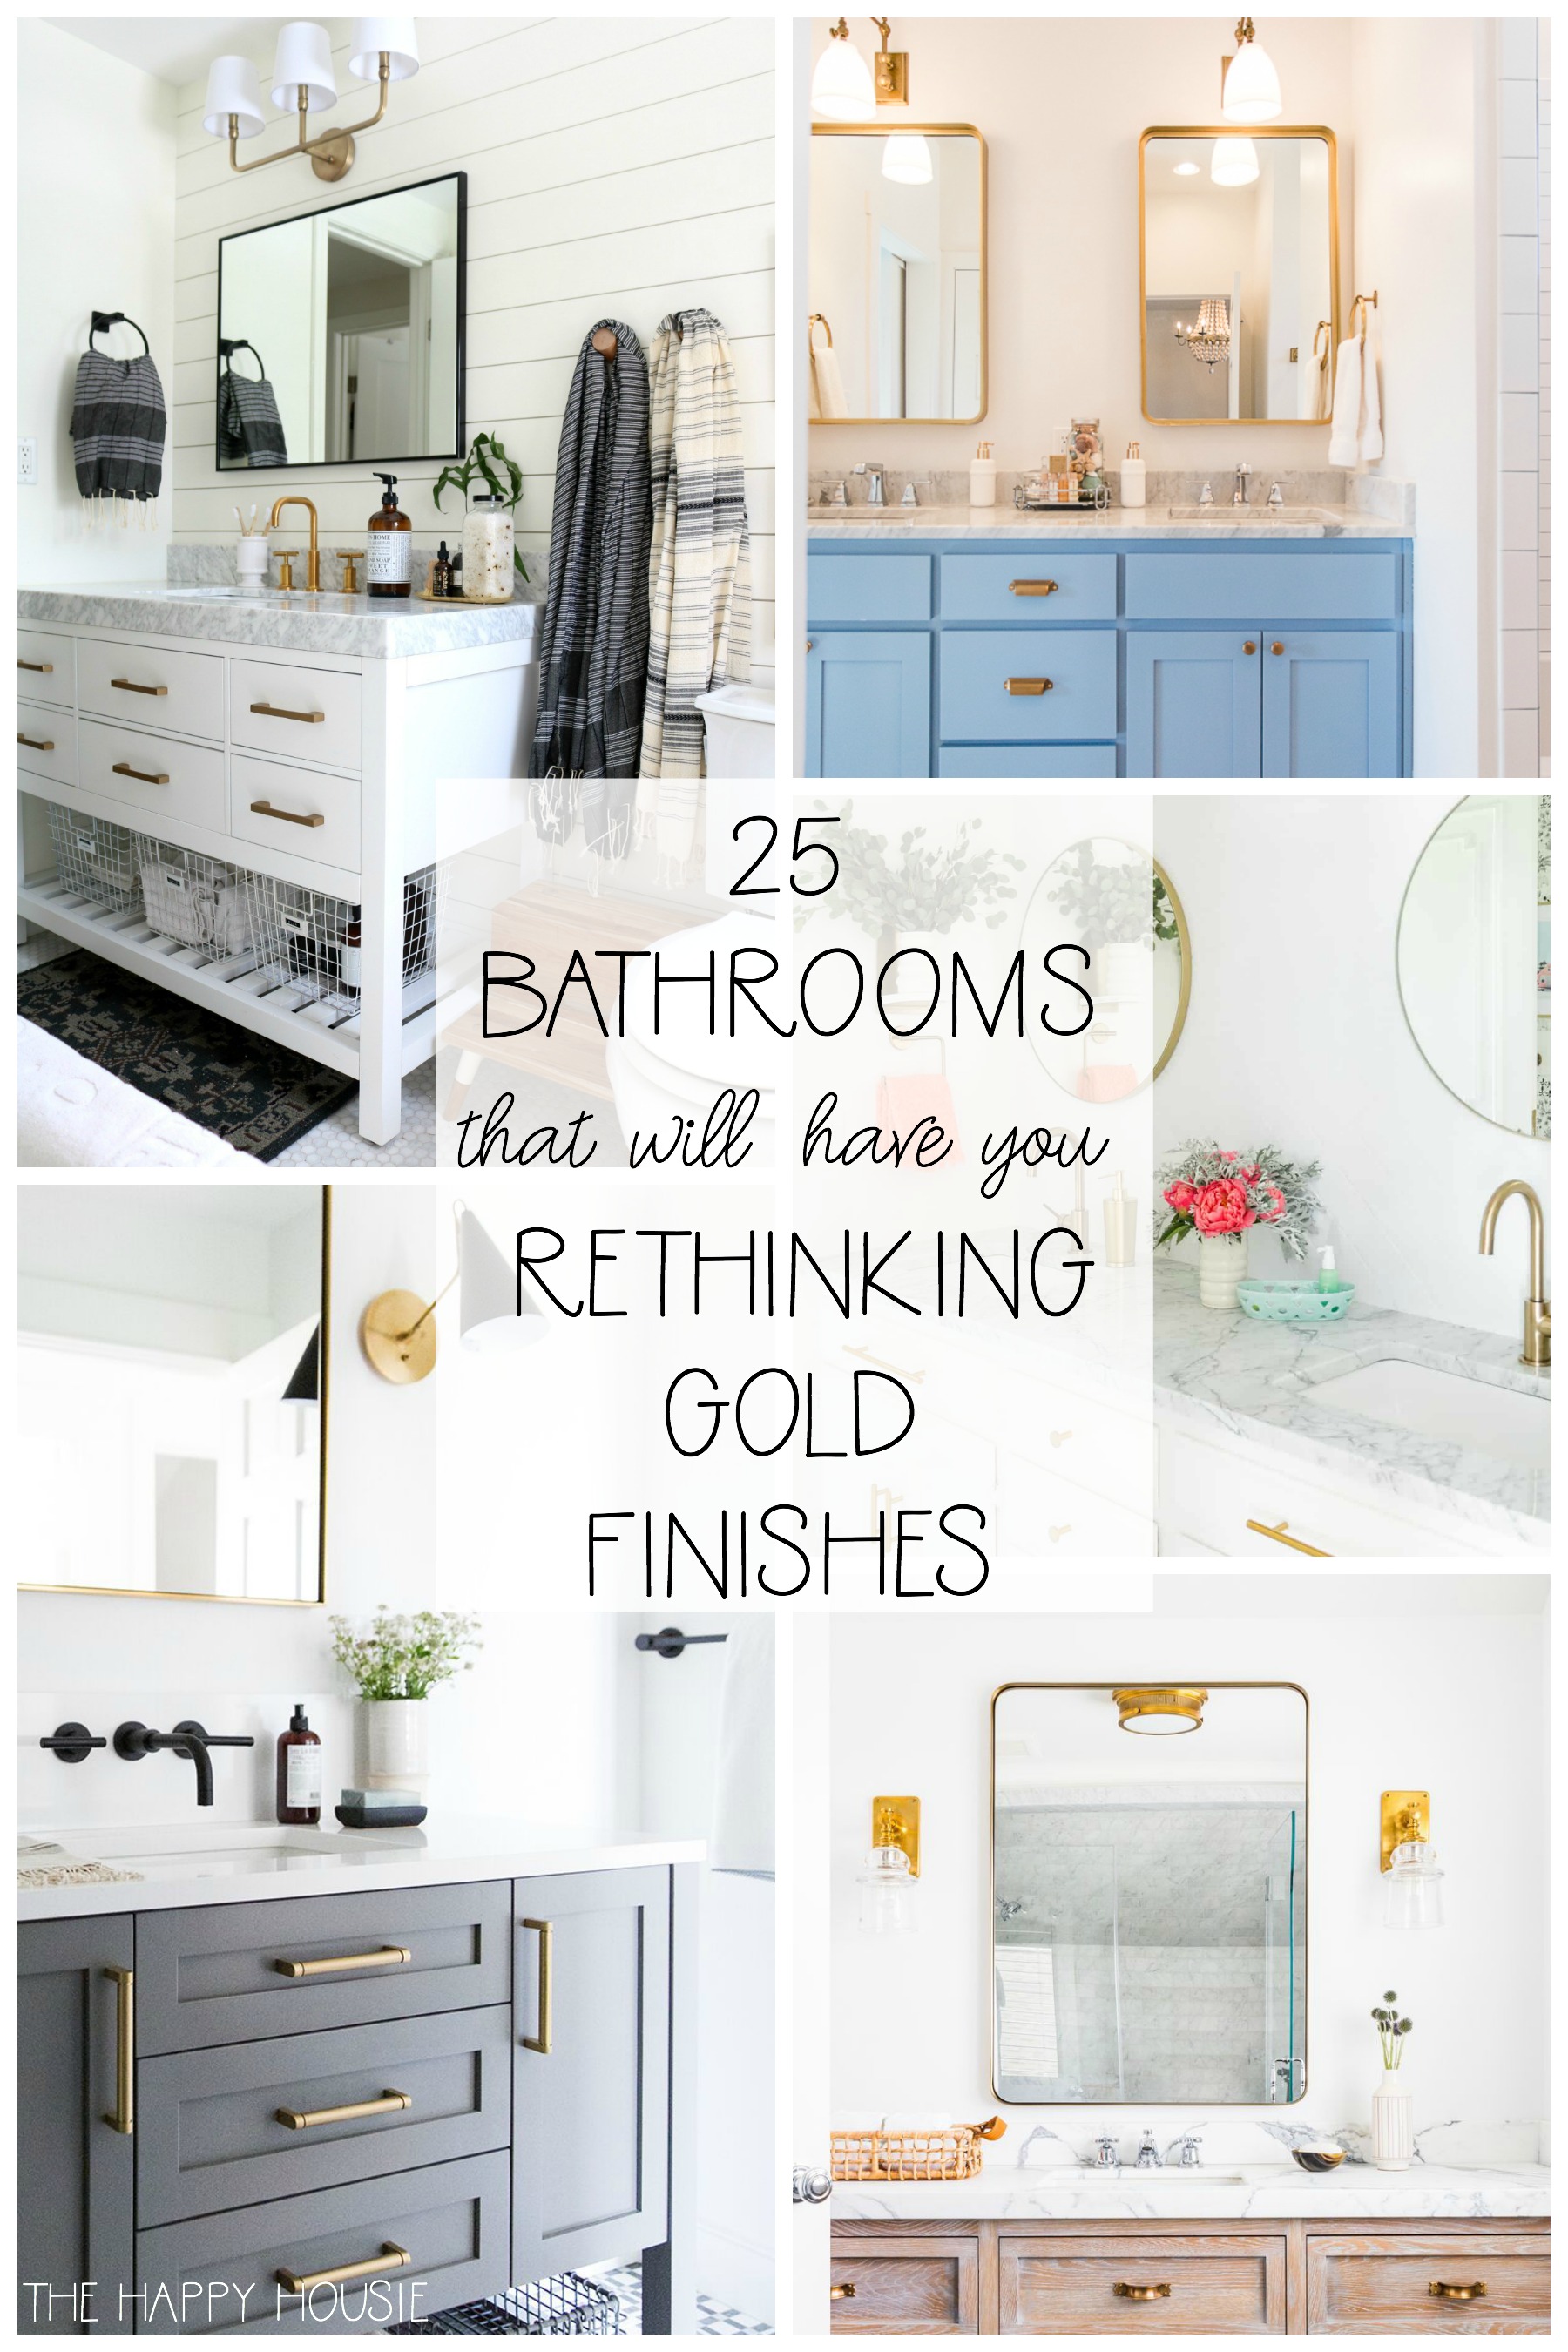 25 Bathroom that will have you rethinking gold finishes poster.